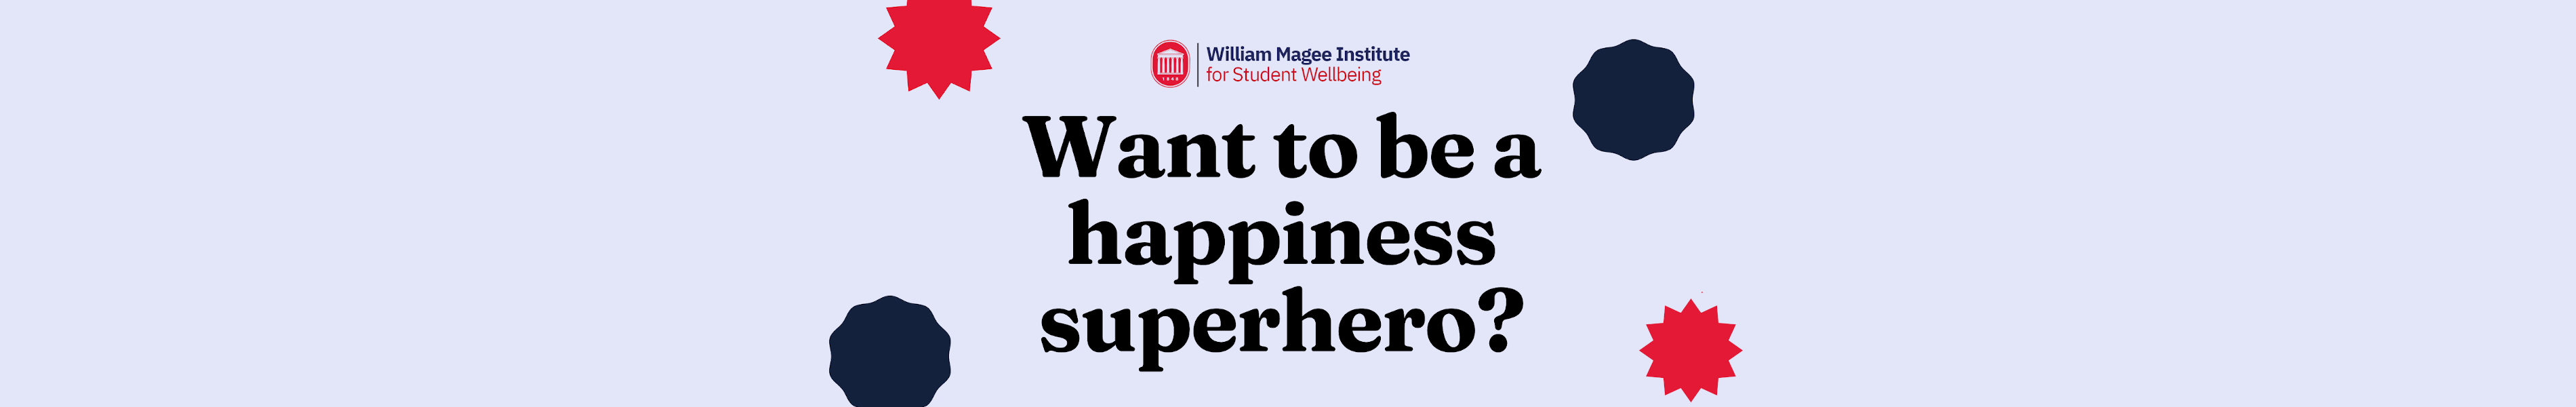 Want to be a happiness superhero?